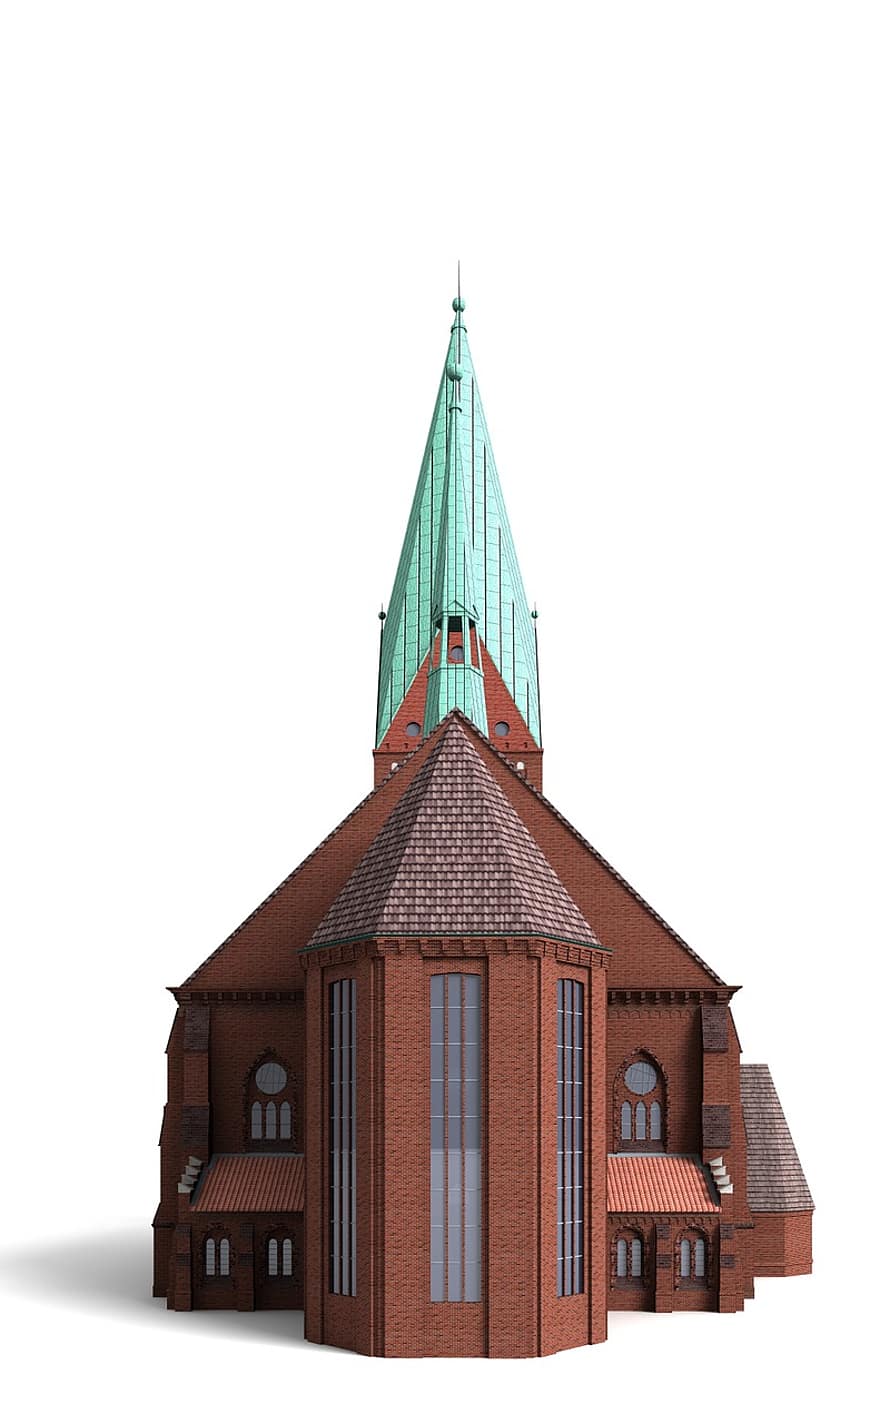 Church, Kiel, Building, Places Of Interest, Historically, Tourists, Attraction, Landmark, Facade, Travel, Cities